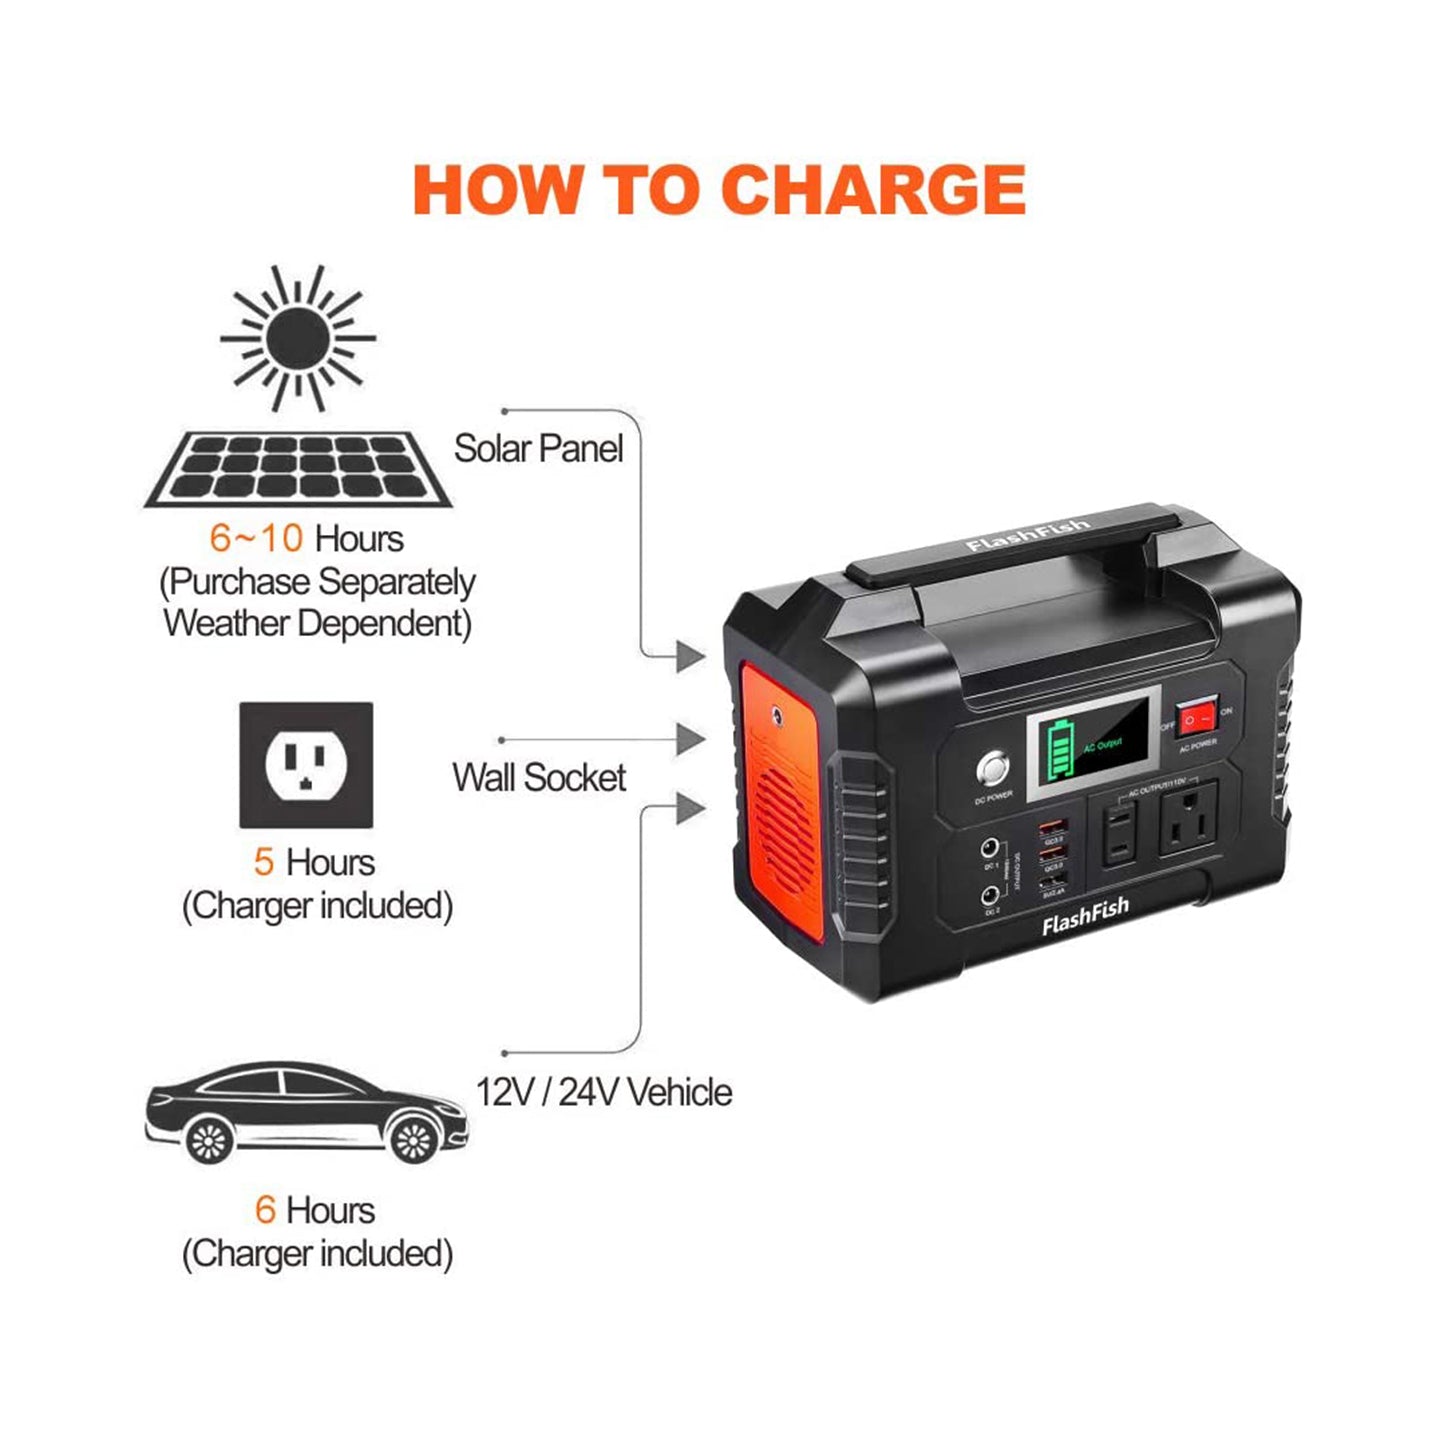 Instuction on how to charge E200 flashfish, 6-8 hours for solar panel, 5 hours at wall socket, 6 hours at 12v/24v vehicle